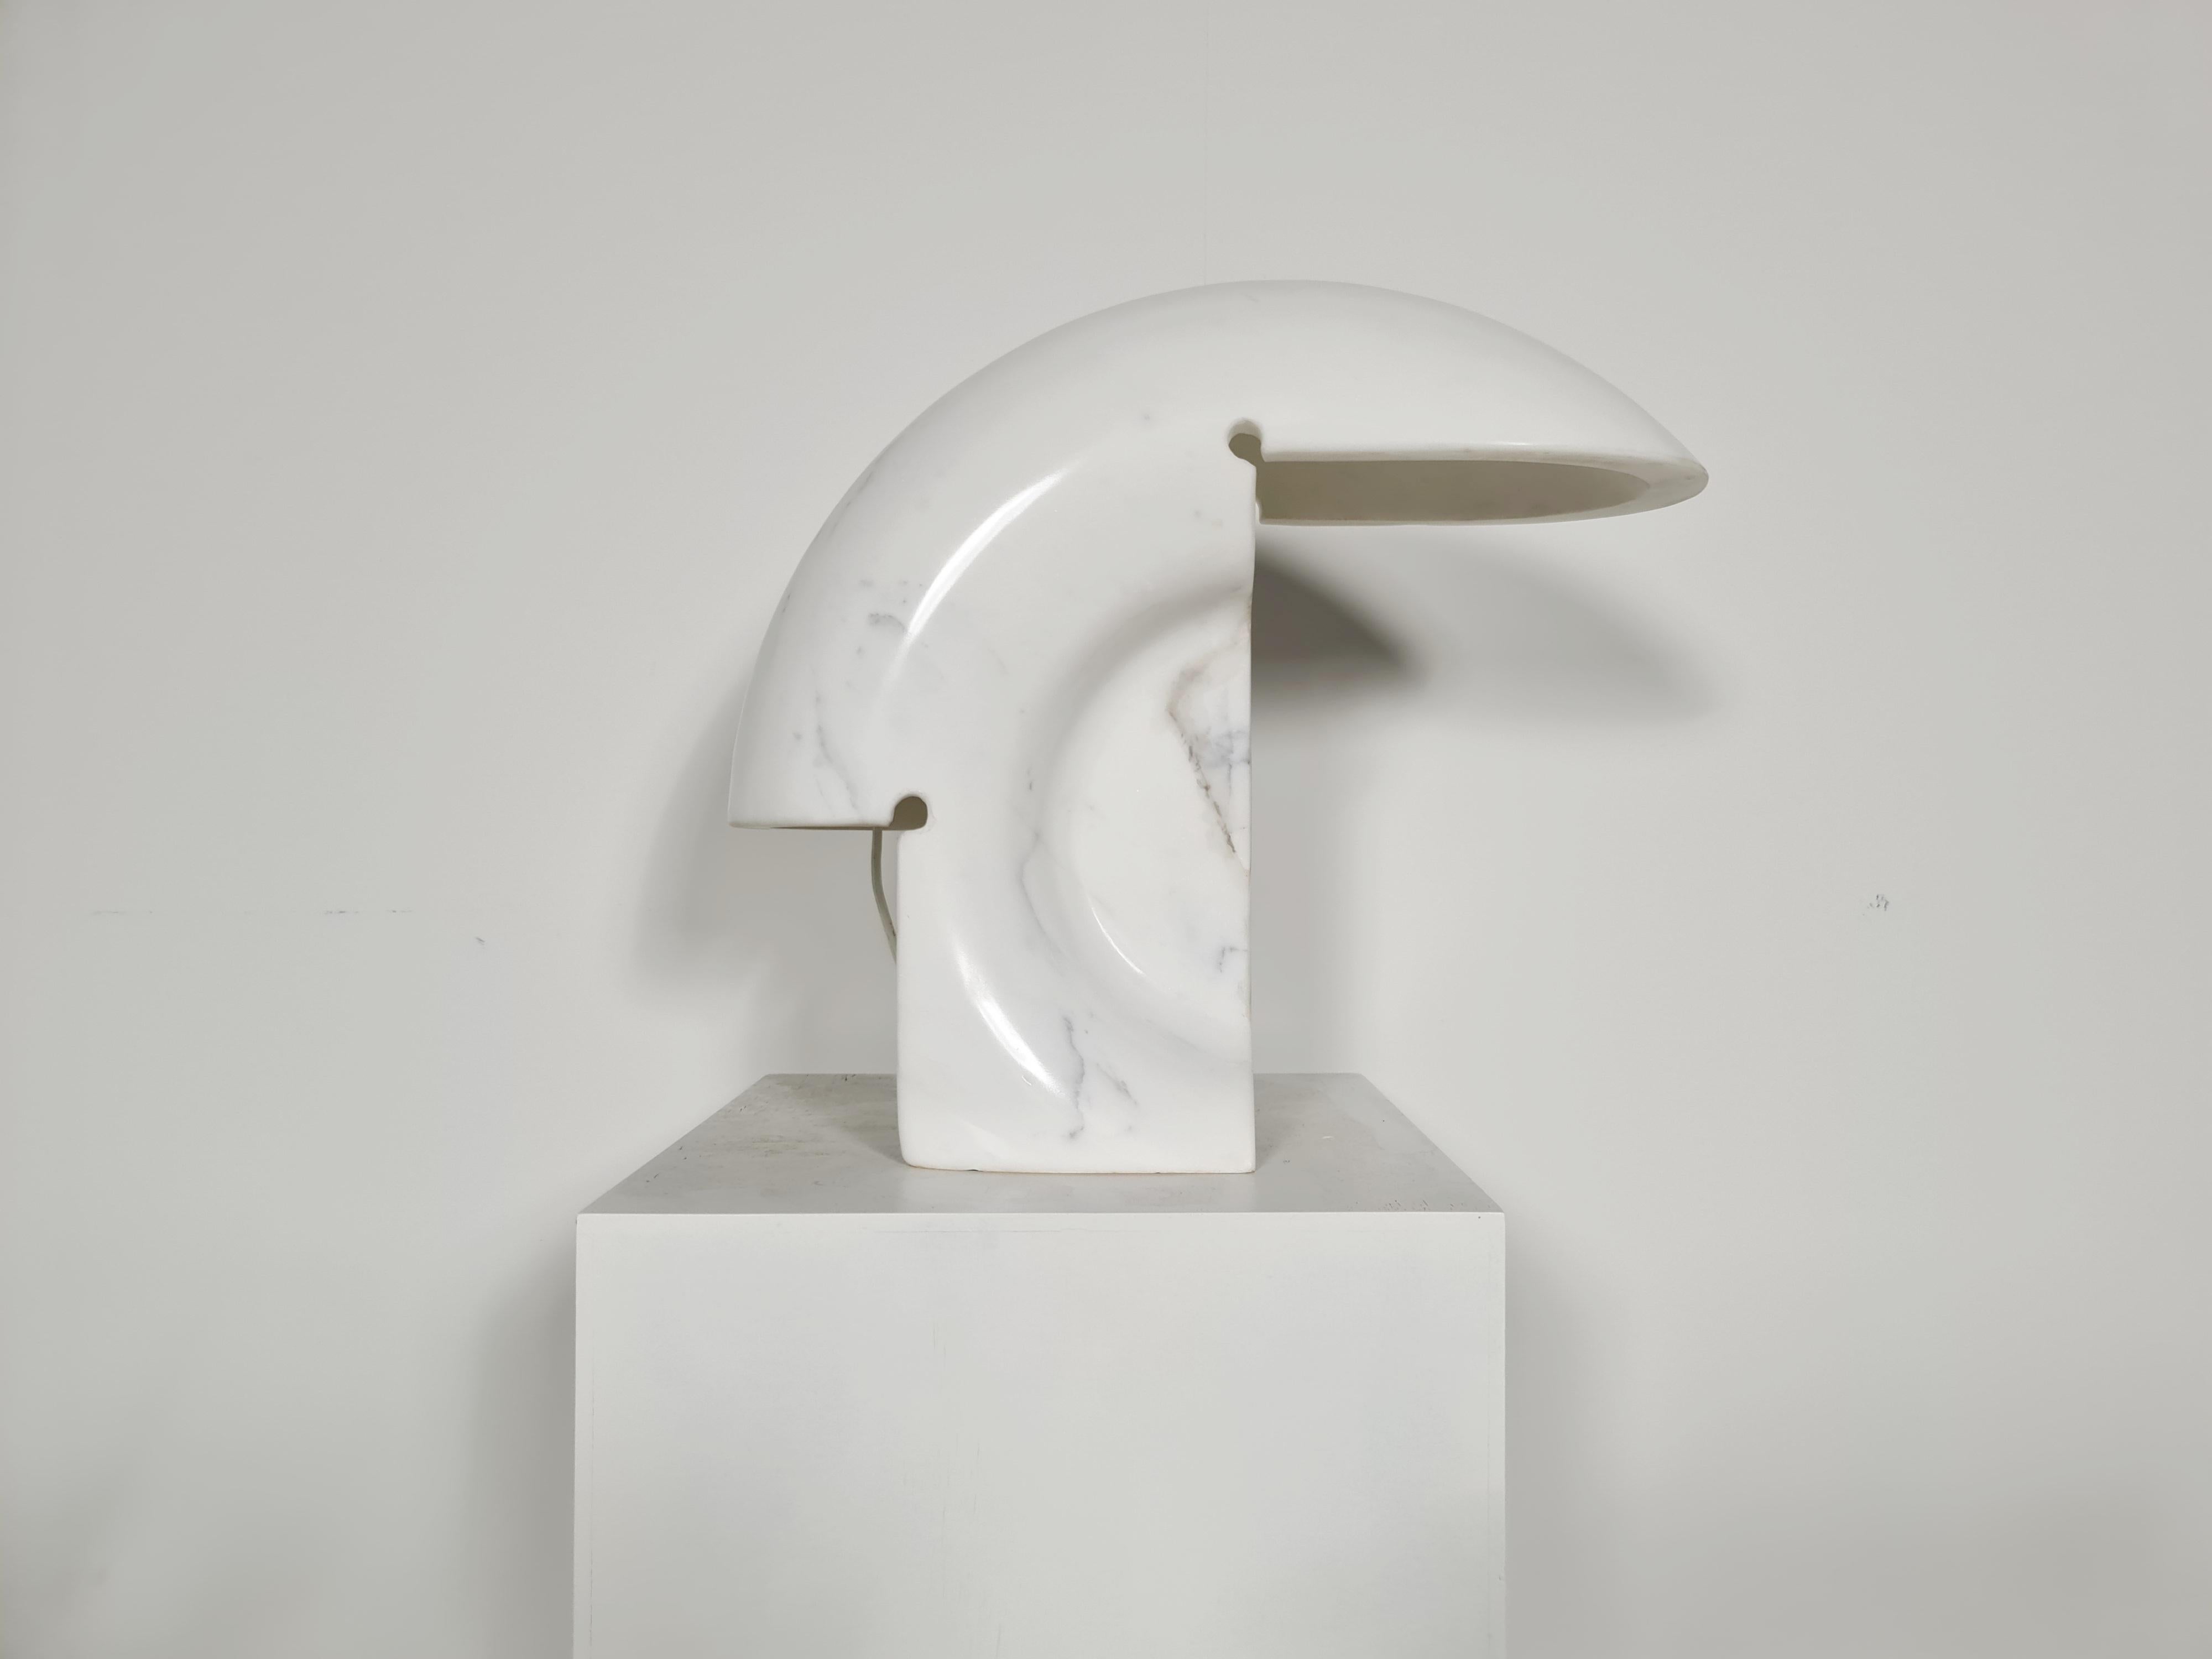 The biagio lamp is one of Tobia Scarpa’s masterpieces. It has been cut and sculpted by hand from solid Carrara marble, resulting in an unique shaped design. The natural thickness of the marble ensures that when lighted, the lamp spreads a pleasing